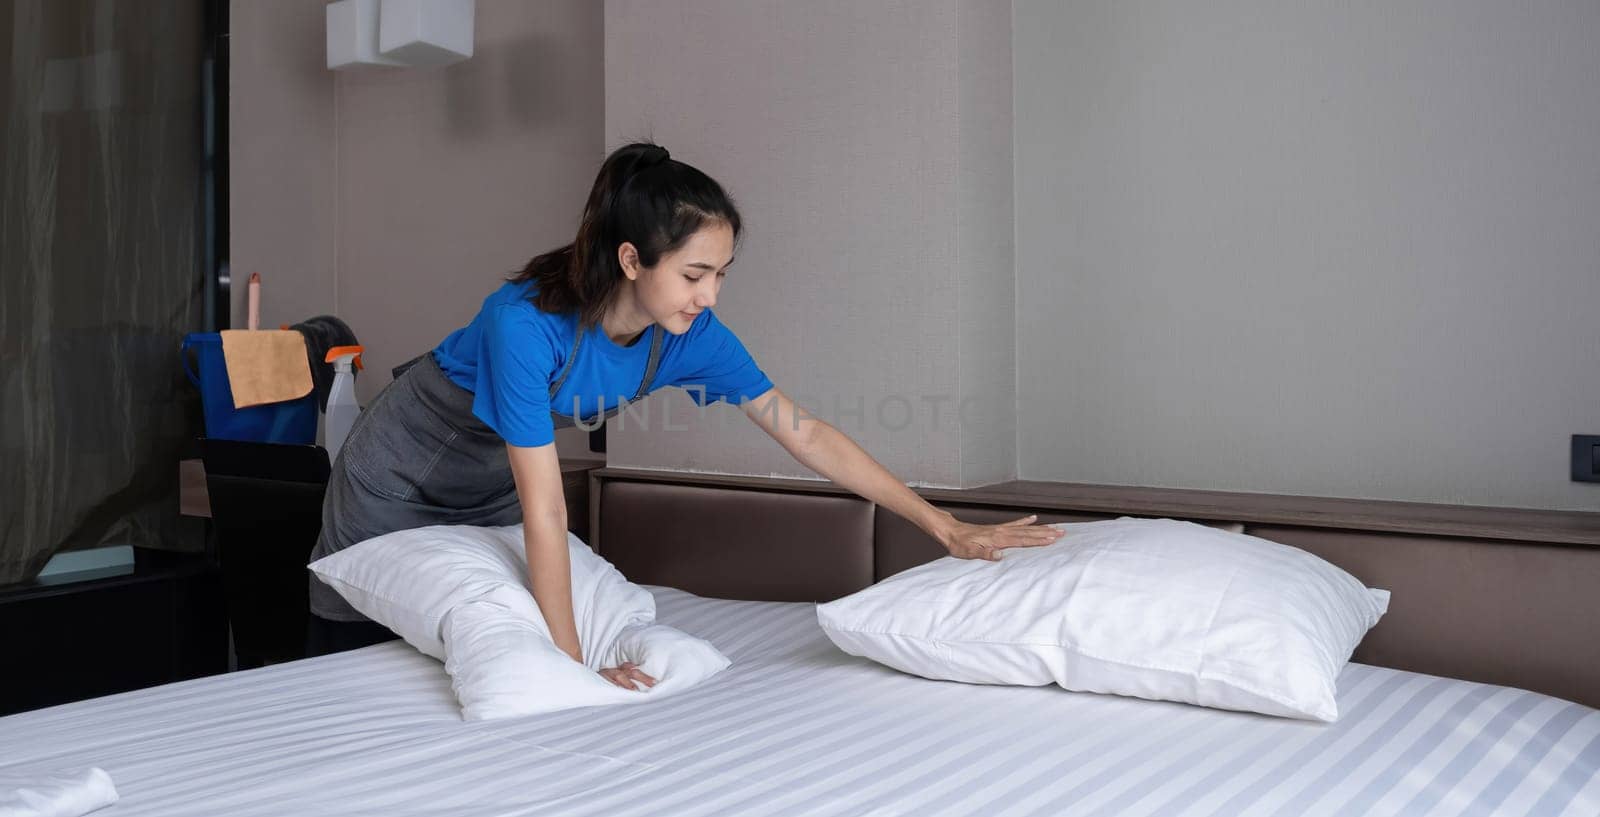 The hotel housekeeper in the room was cleaning the bed and preparing the bedding..